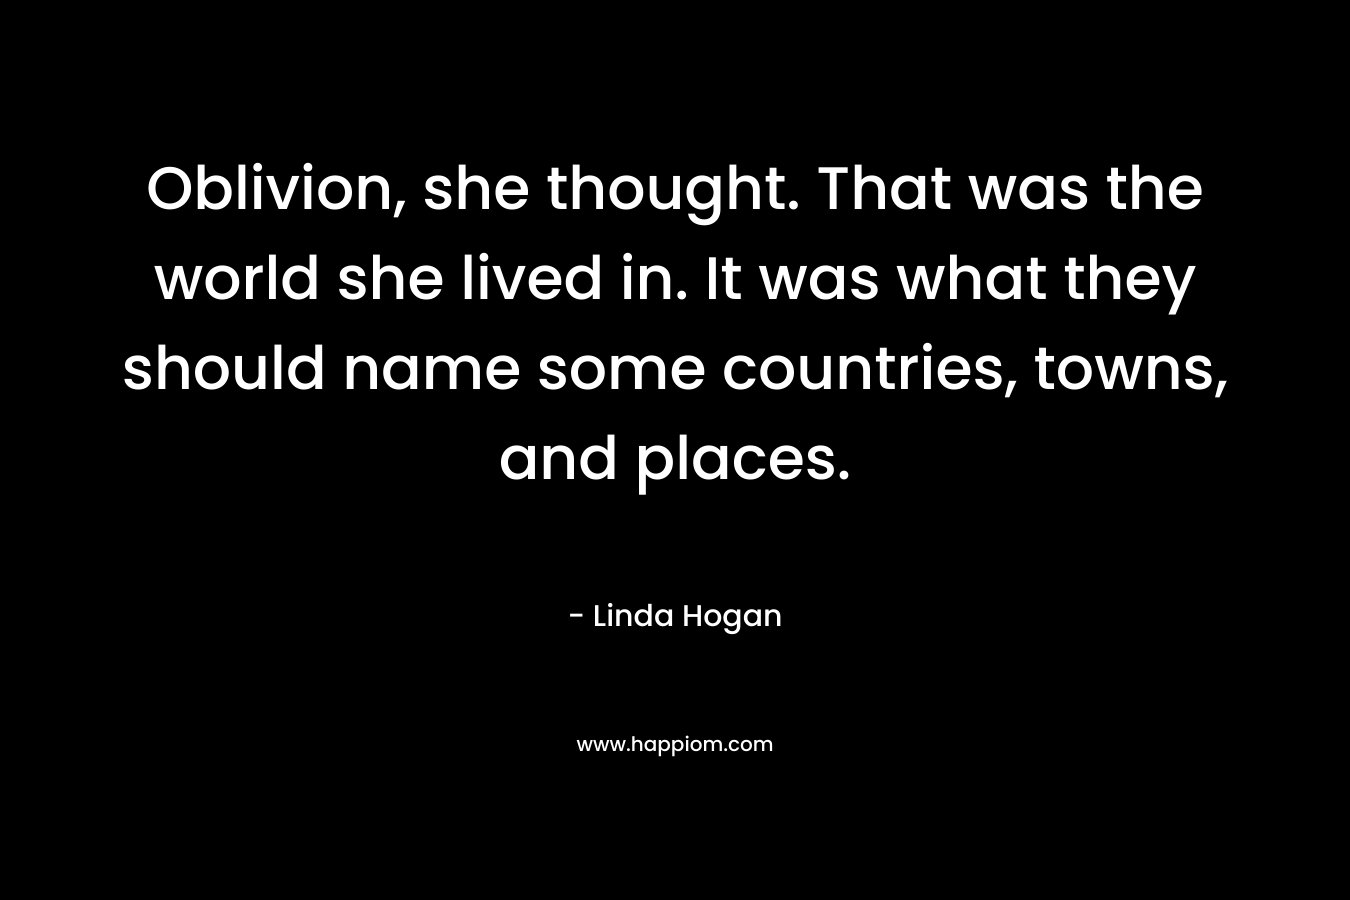 Oblivion, she thought. That was the world she lived in. It was what they should name some countries, towns, and places.